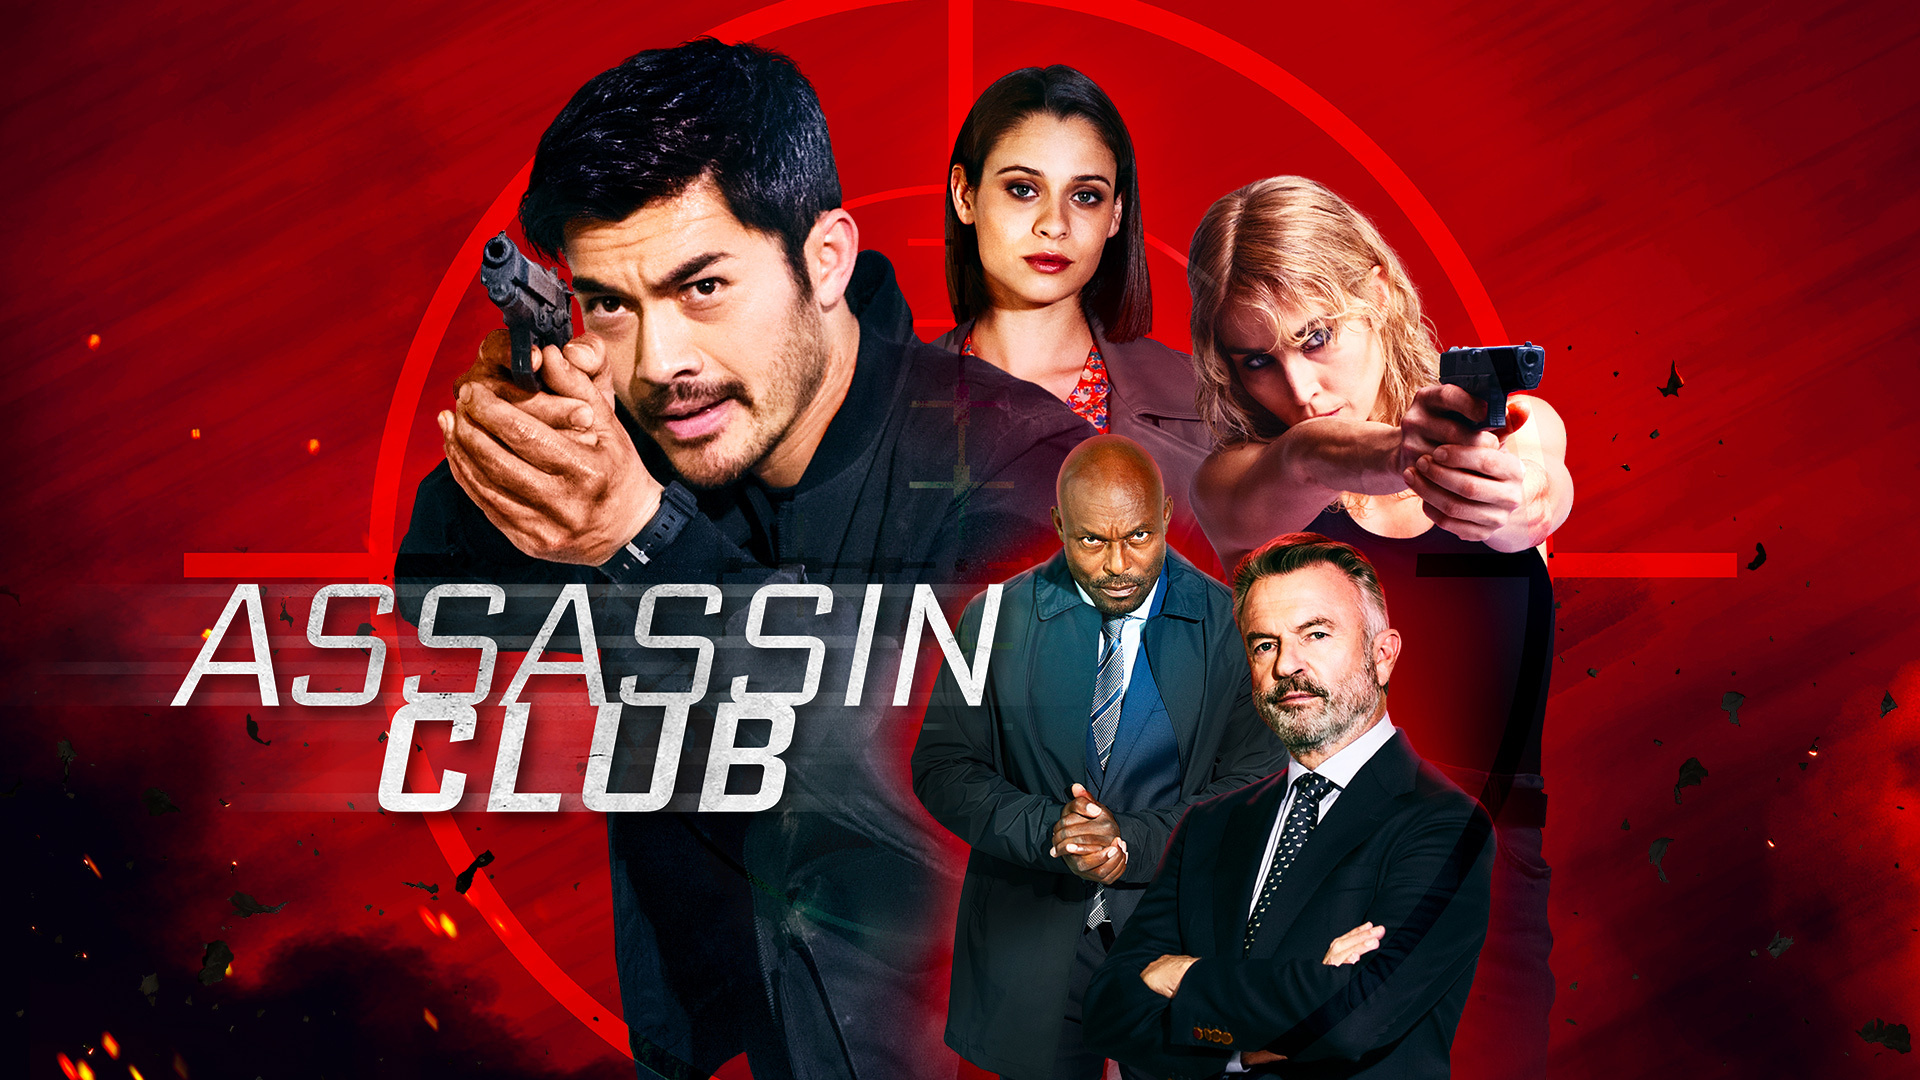 Assassin Club Will Unite Henry Golding, Noomi Rapace, And Sam Neill For A  New Action Movie